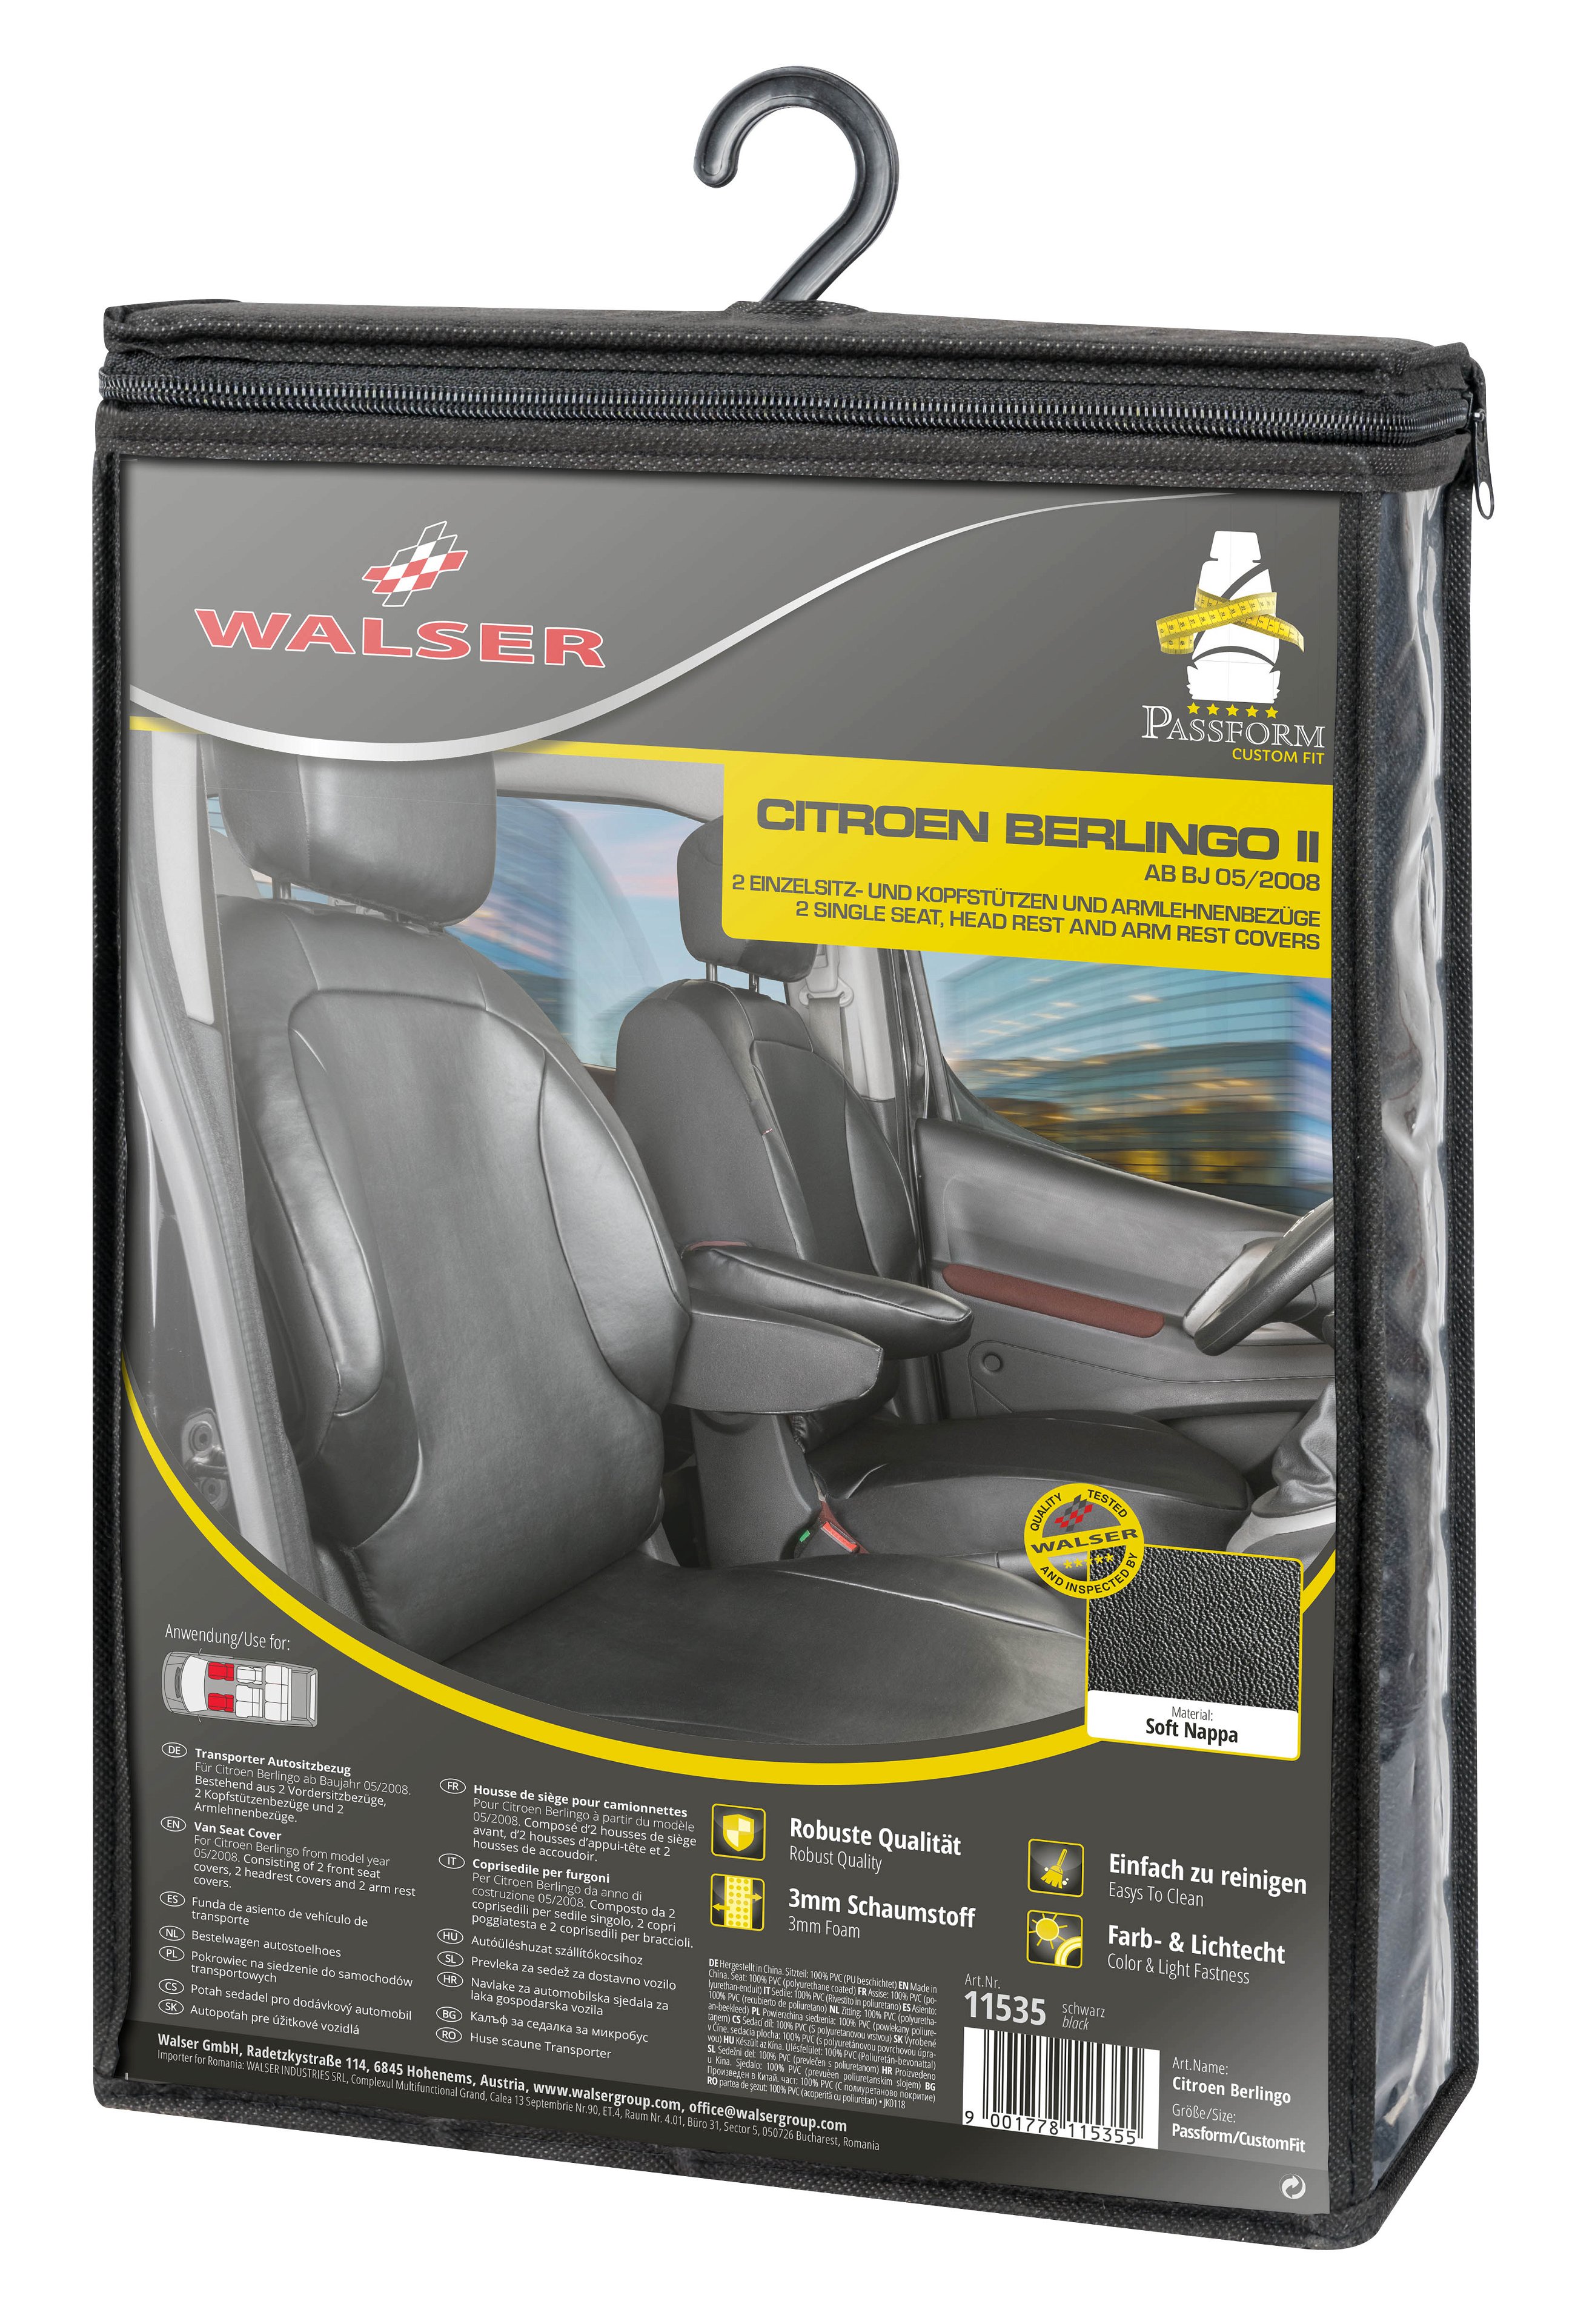 Seat cover made of imitation leather for Citroen Berlingo, 2 single seat covers front